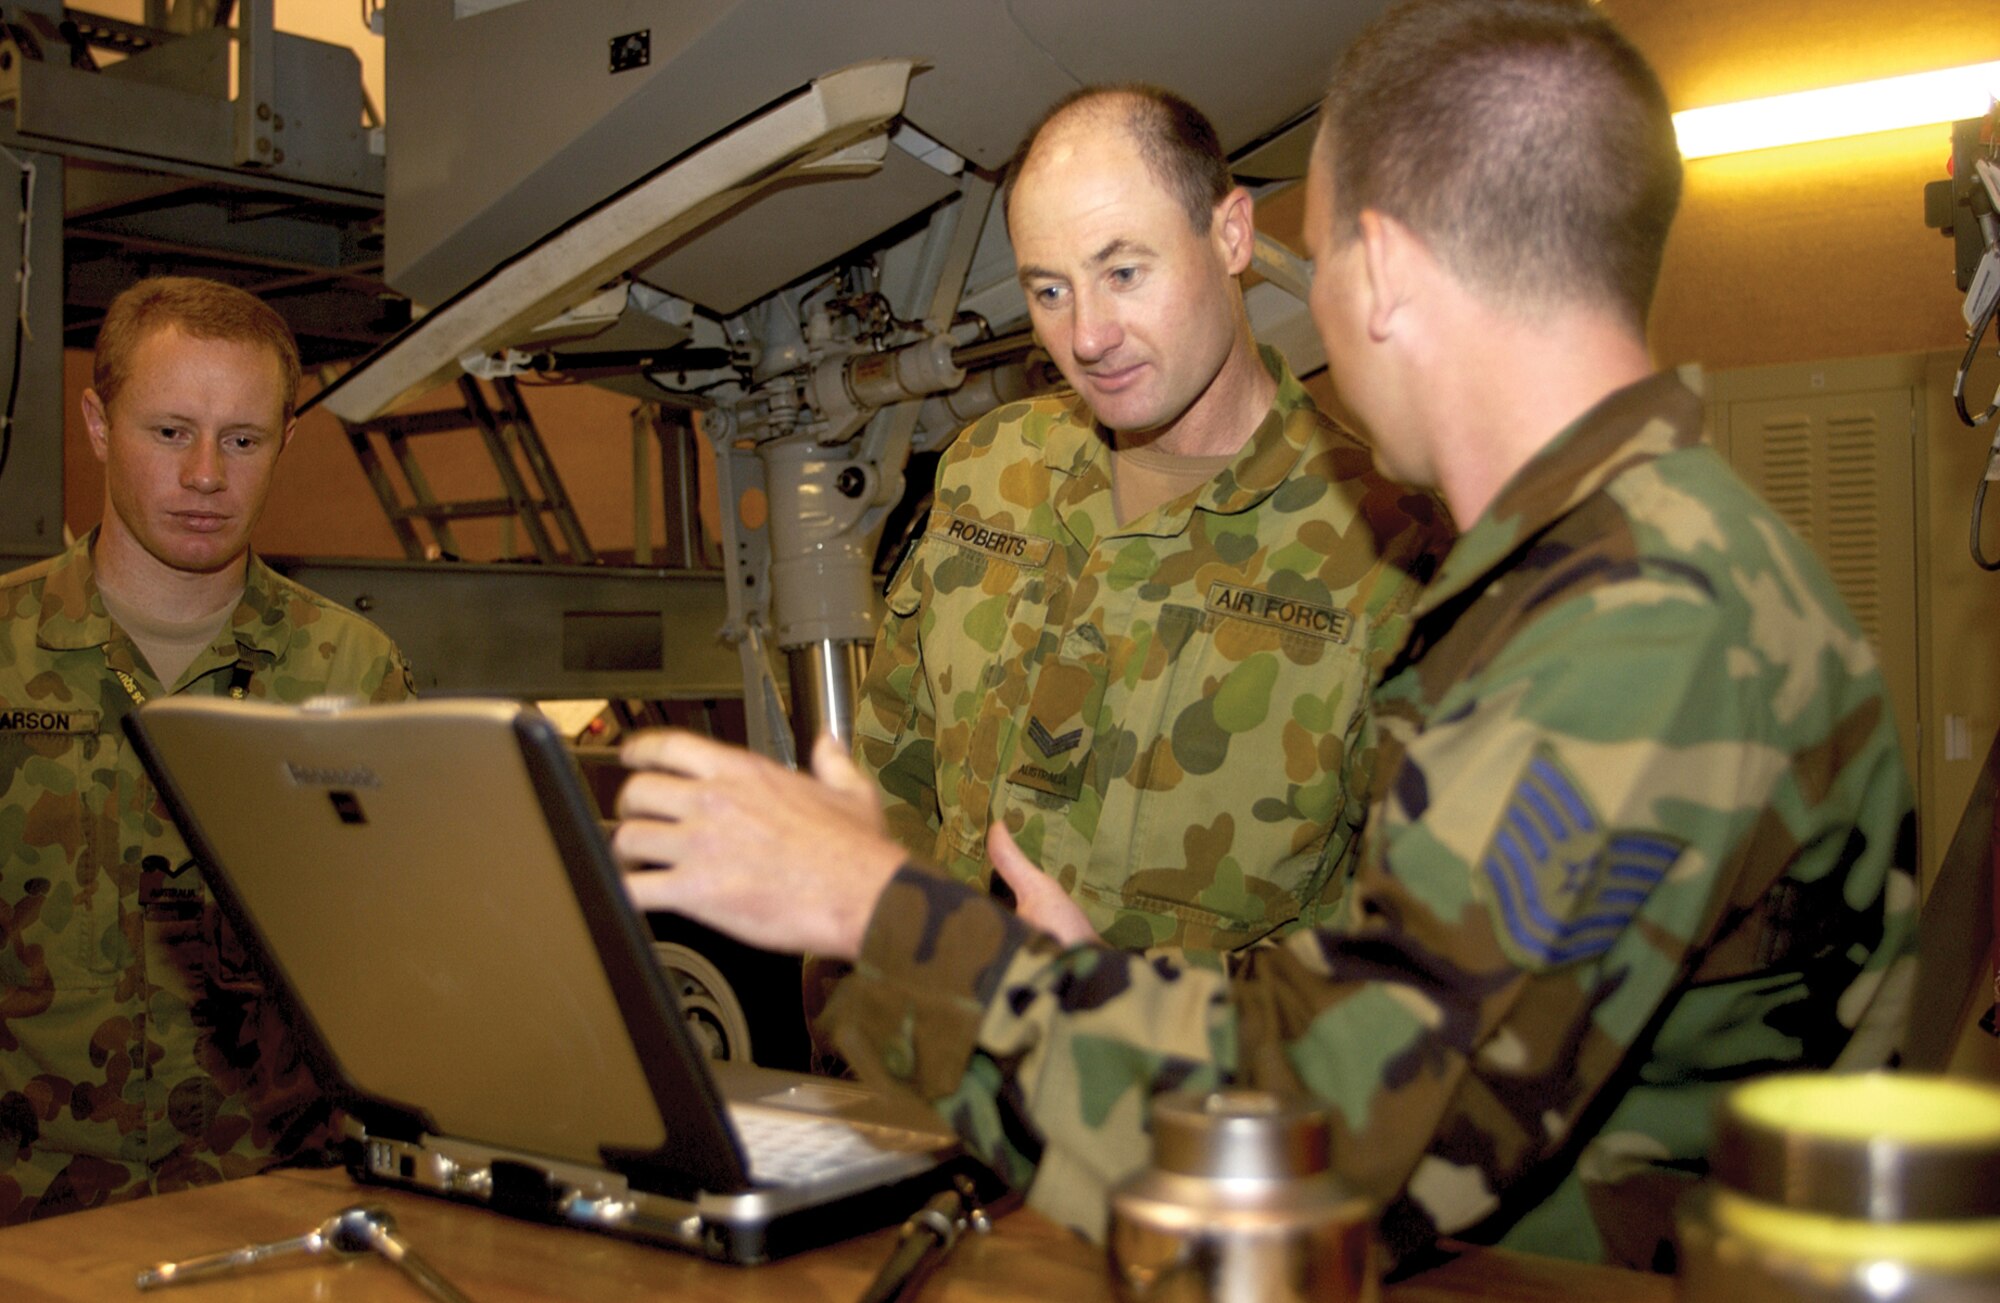 Royal Australian Air Force Cpl. David Roberts (center) and Leading Aircraftsman Michael Clarson (left), go over computer-based technical orders with Tech. Sgt. Troy Barber, 373rd Training Squadron Detachment 5, at the 373 DET. 5 training building Sept. 29. Twenty-four RAAF members have been at Charleston AFB since July 31 receiving training on C-17 maintenance procedures.  (U.S. Air Force photo/Airman 1st Class Sam Hymas)